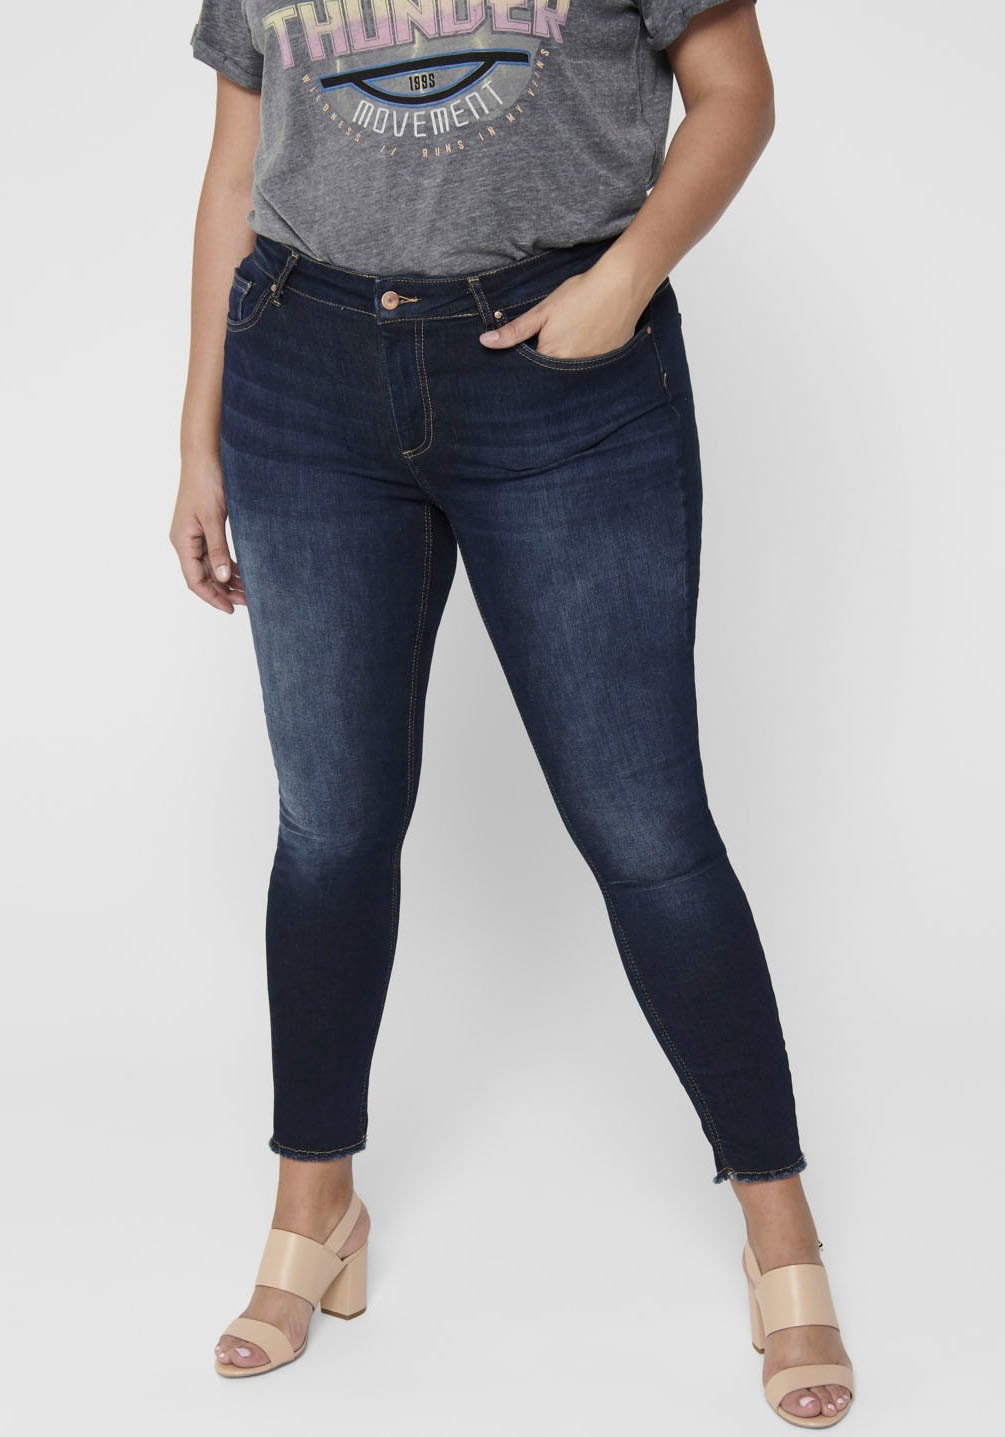 »CARWILLY Skinny-fit-Jeans SK | ONLY CARMAKOMA ANK REG I\'m Optik bestellen washed-out JNS«, walking in